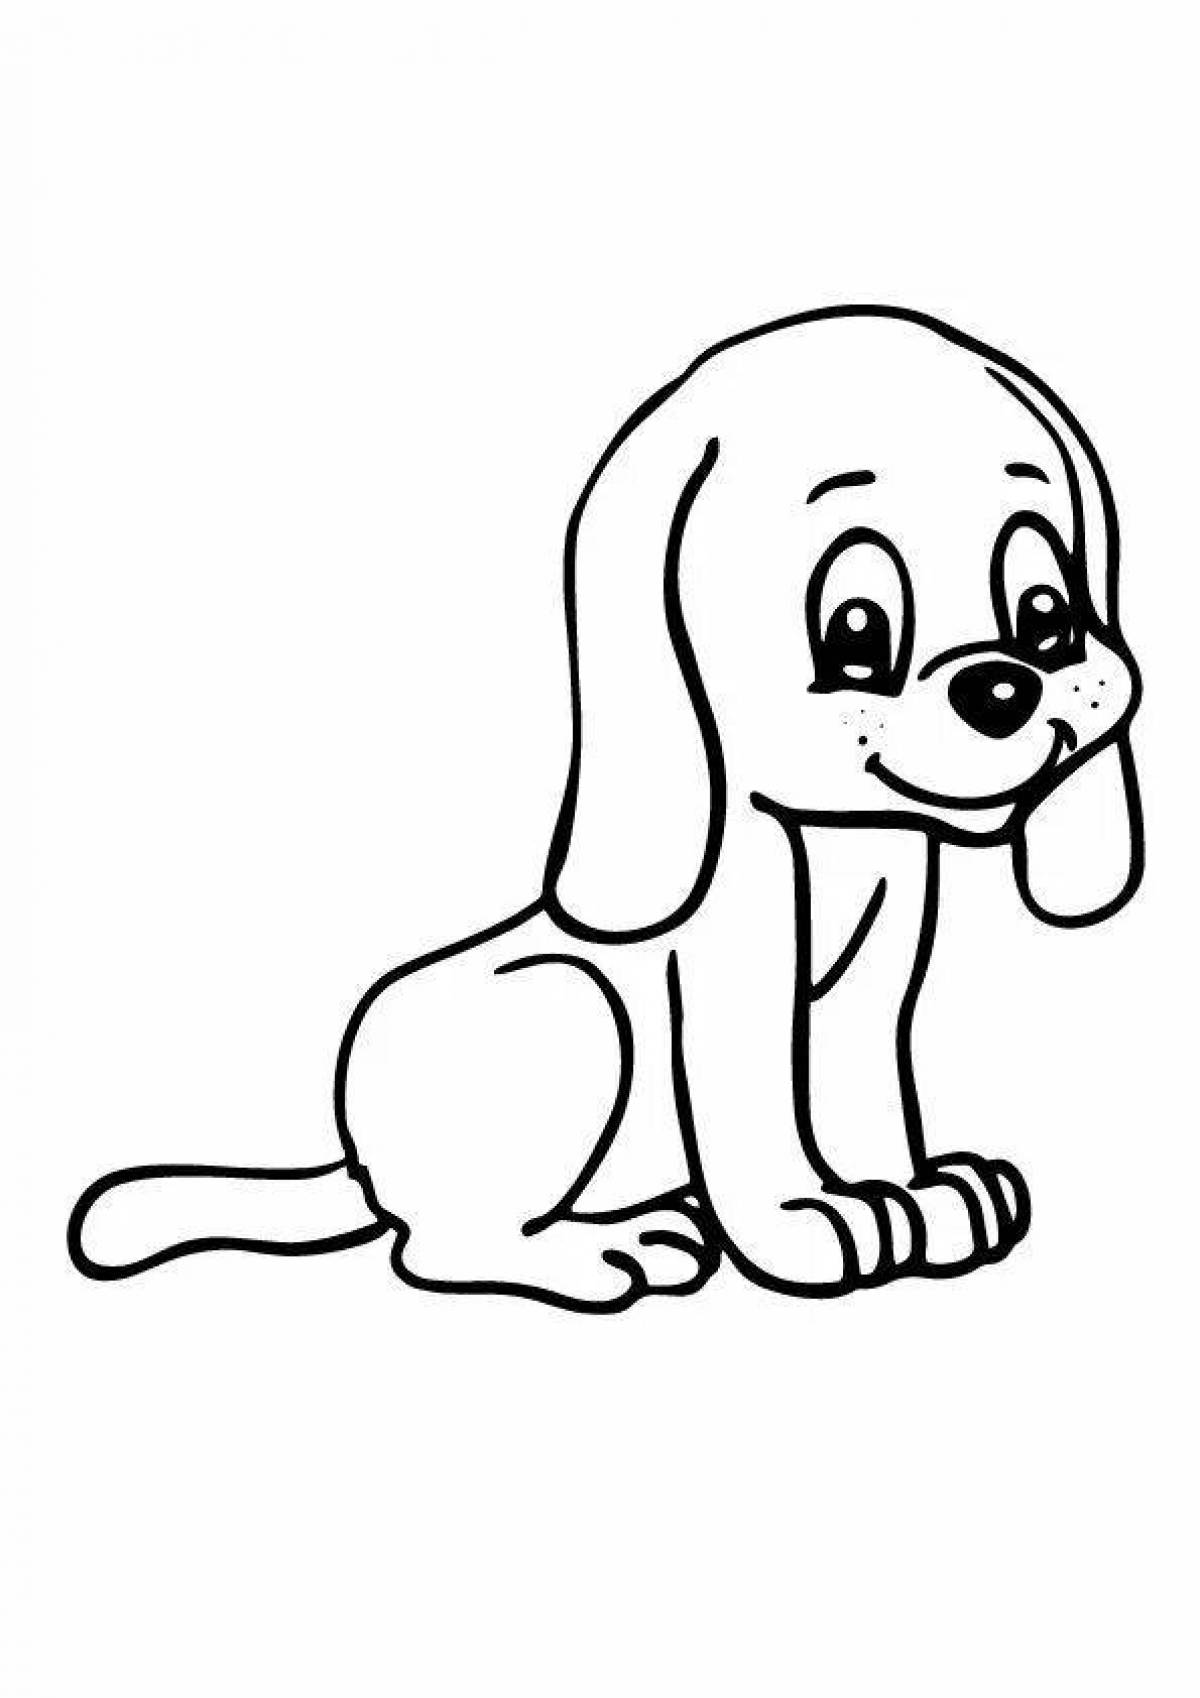 Colouring funny dog